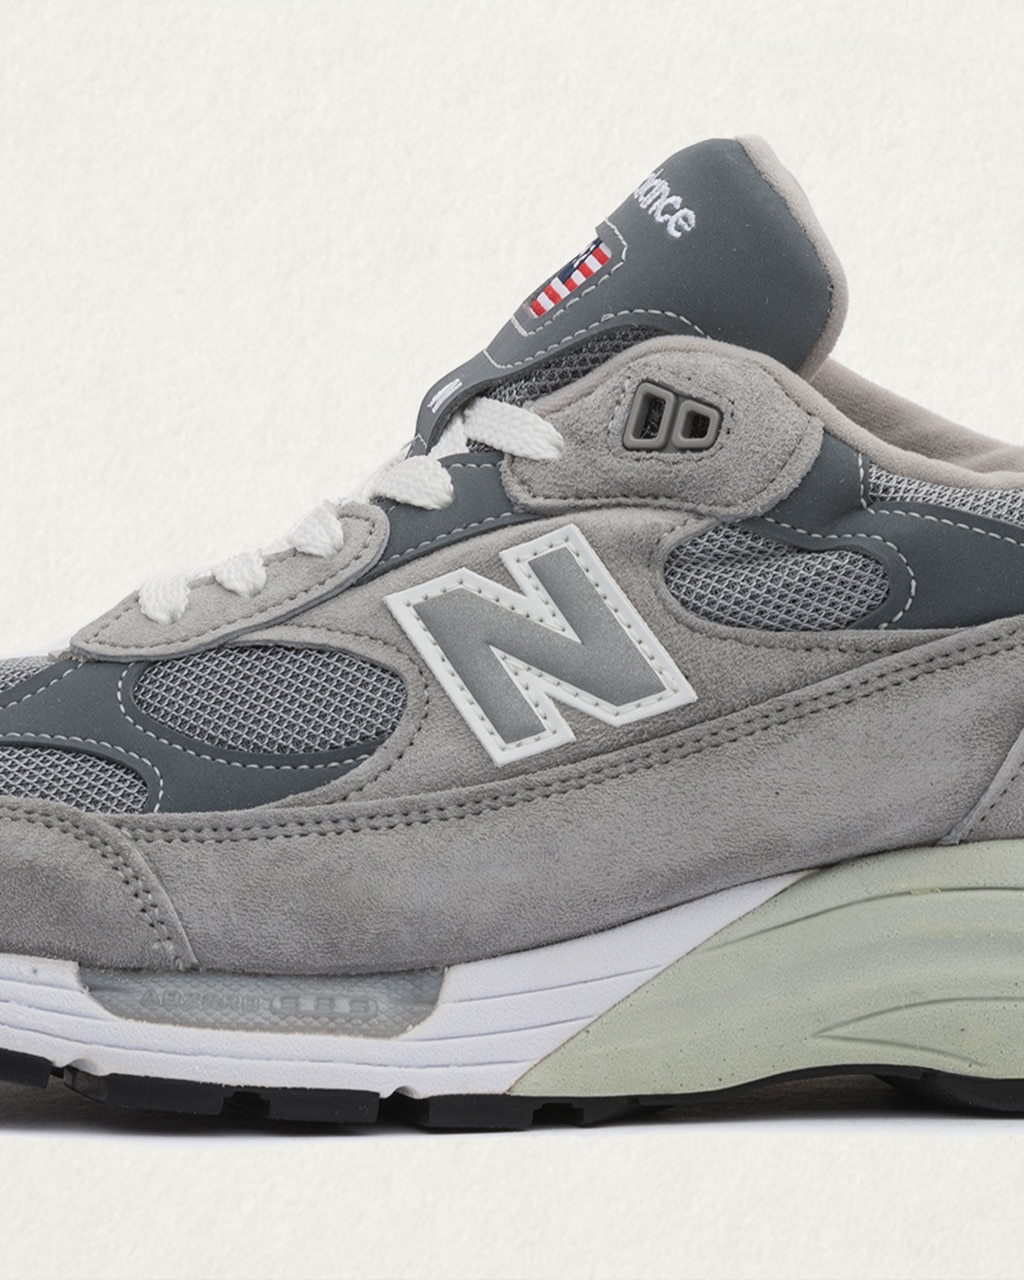 How The New Balance 992 Became An Unlikely Sneaker Icon | The | MR PORTER